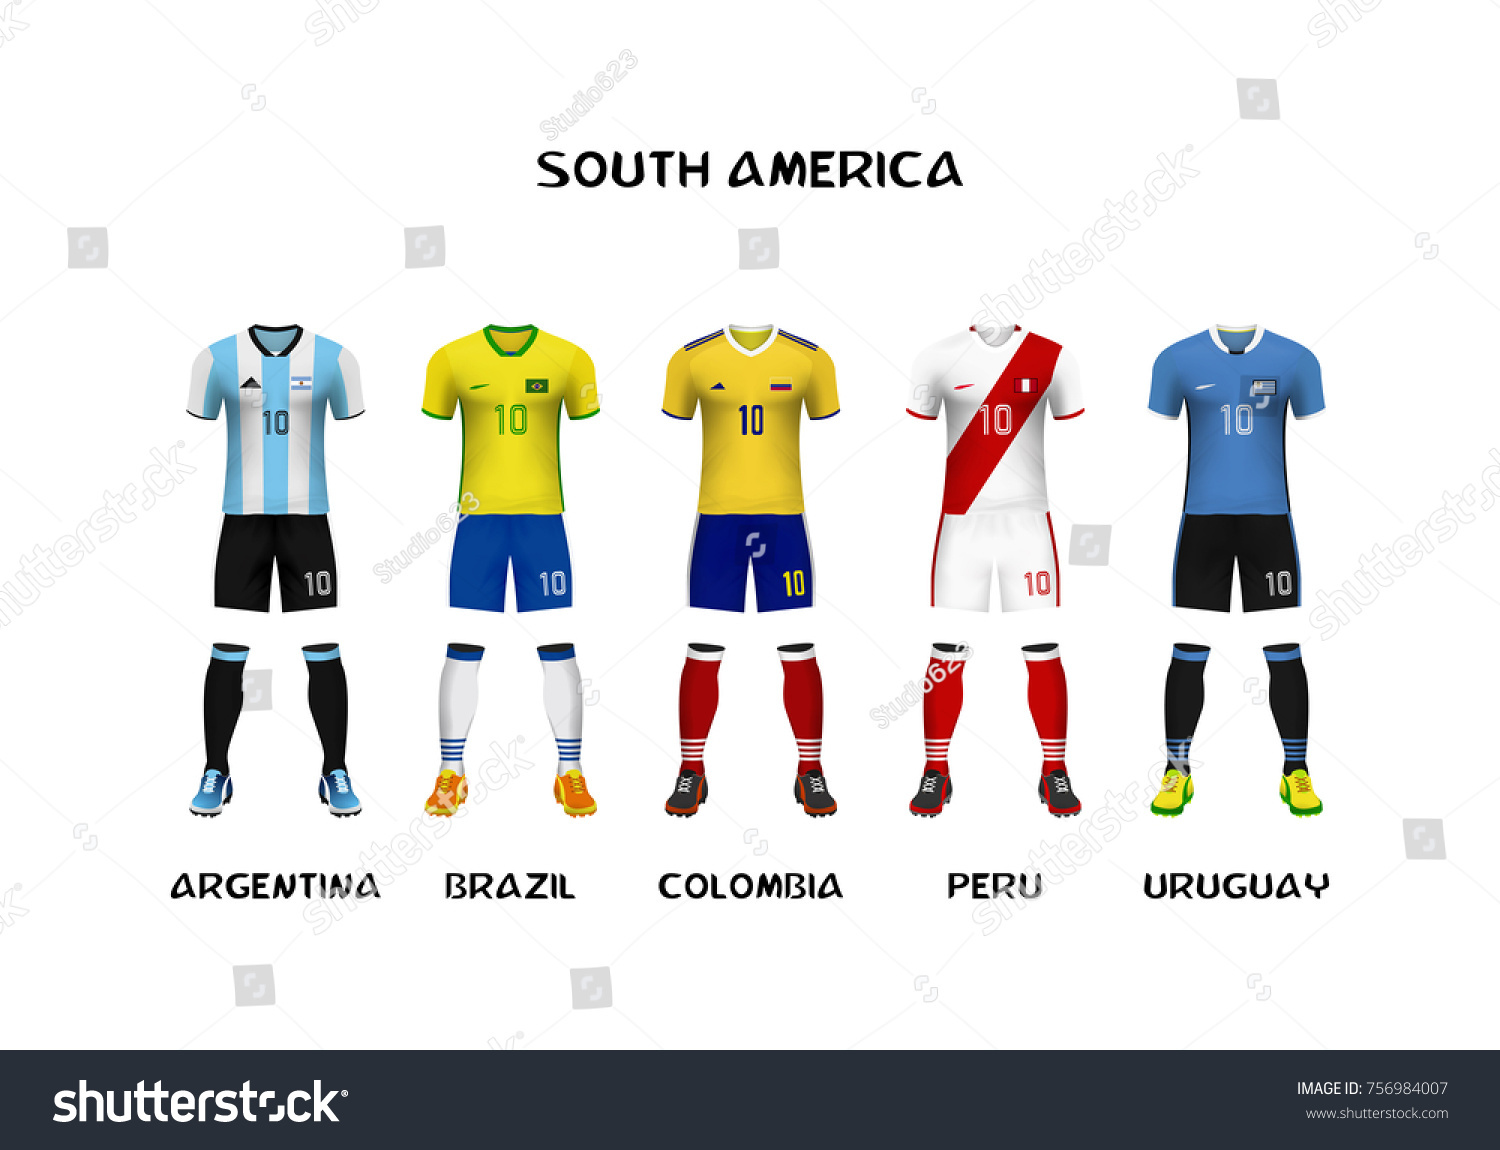 Download Mockup South America Football Jersey Concept Stock Vector ...